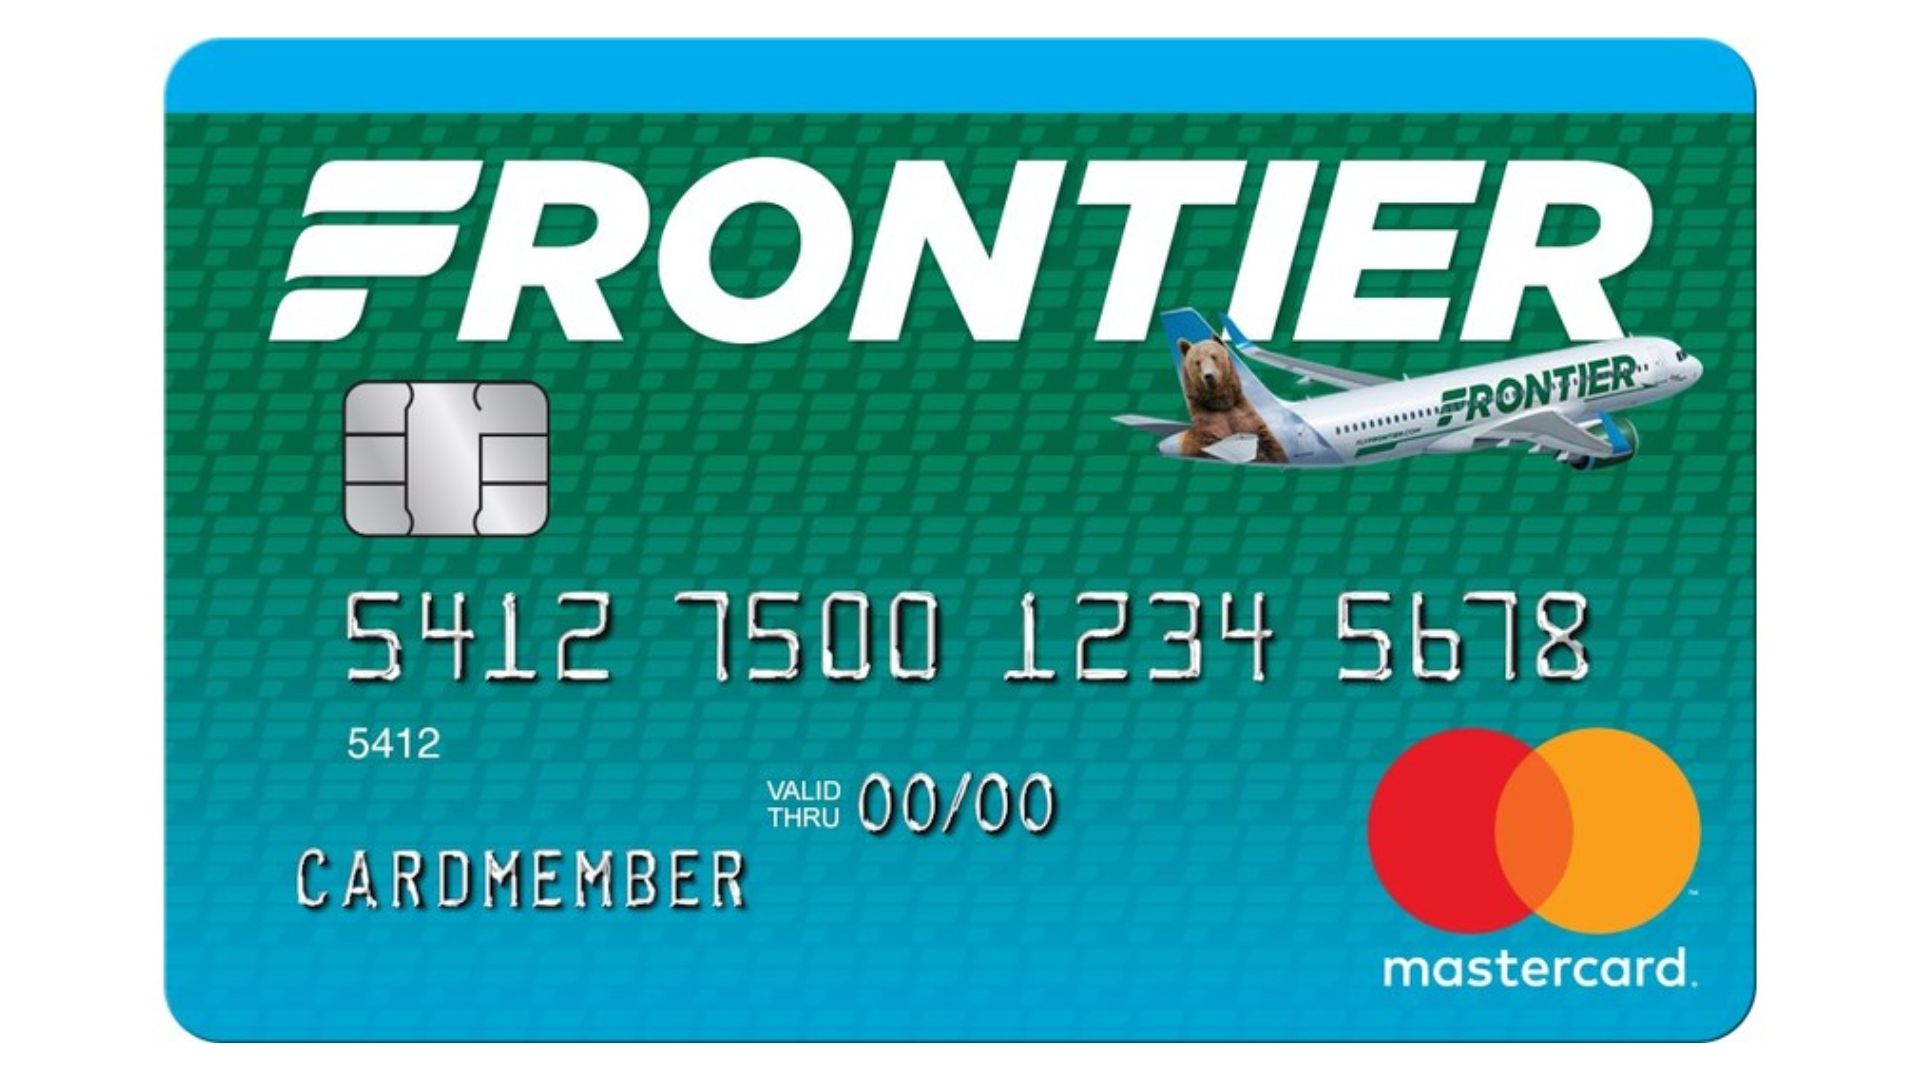 Frontier Airlines Credit Card